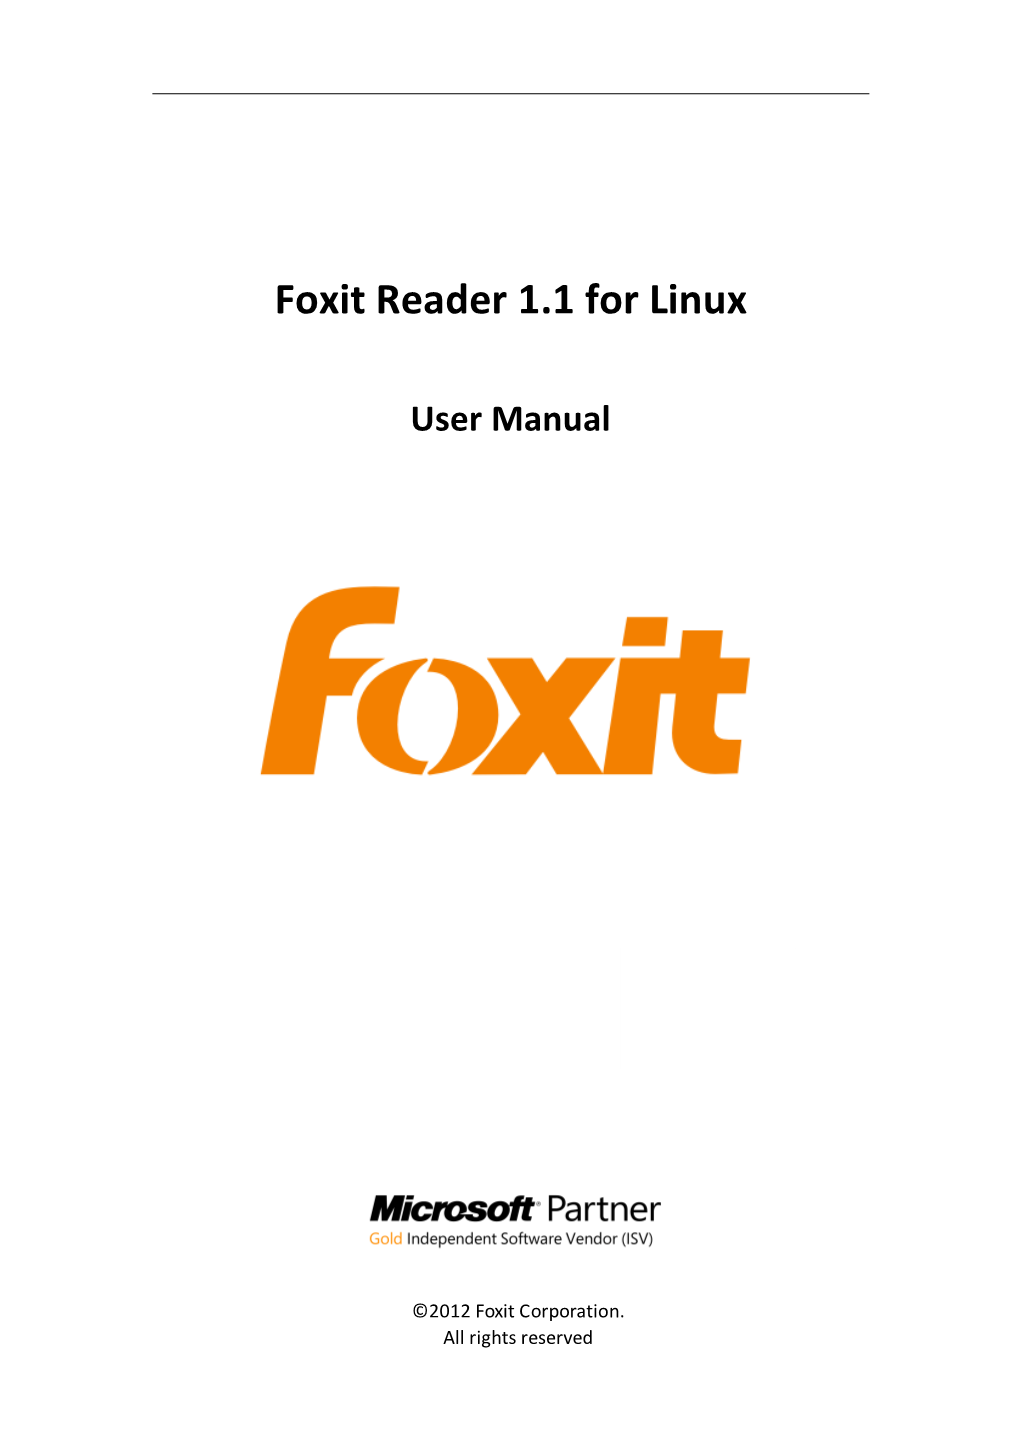 Foxit Reader 1.1 for Linux